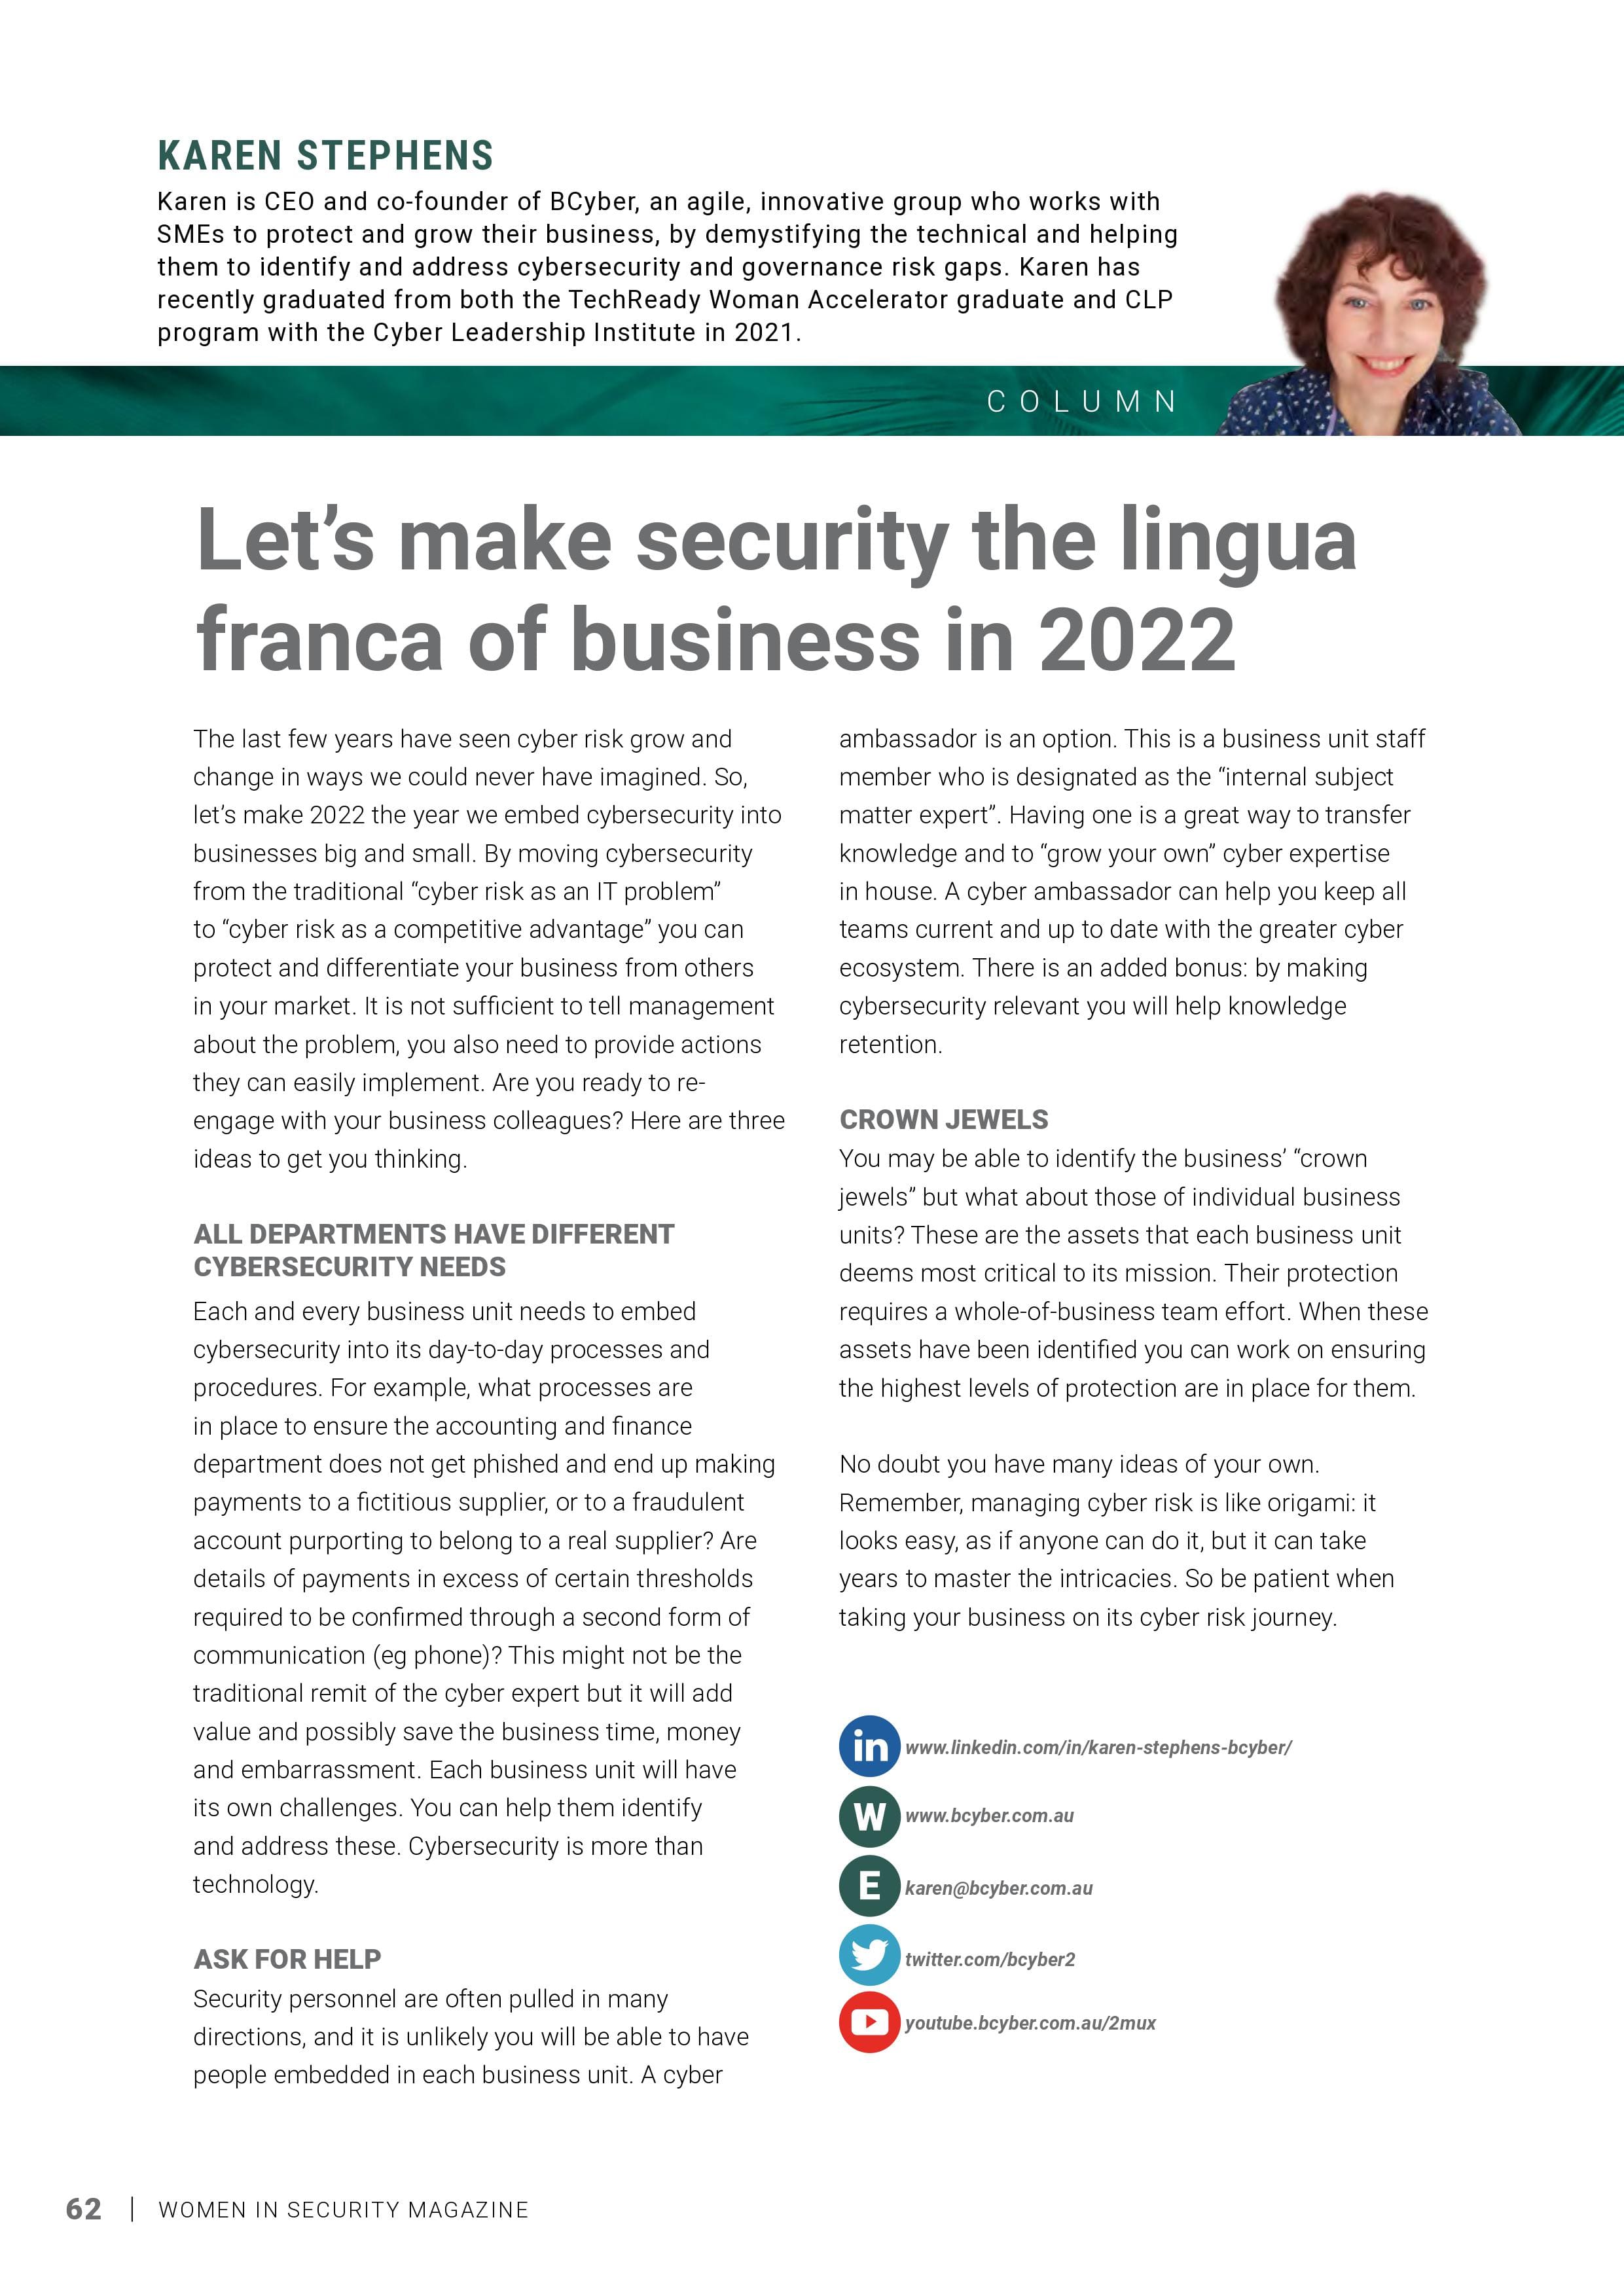 lets make security the lingua franca of business in 2022